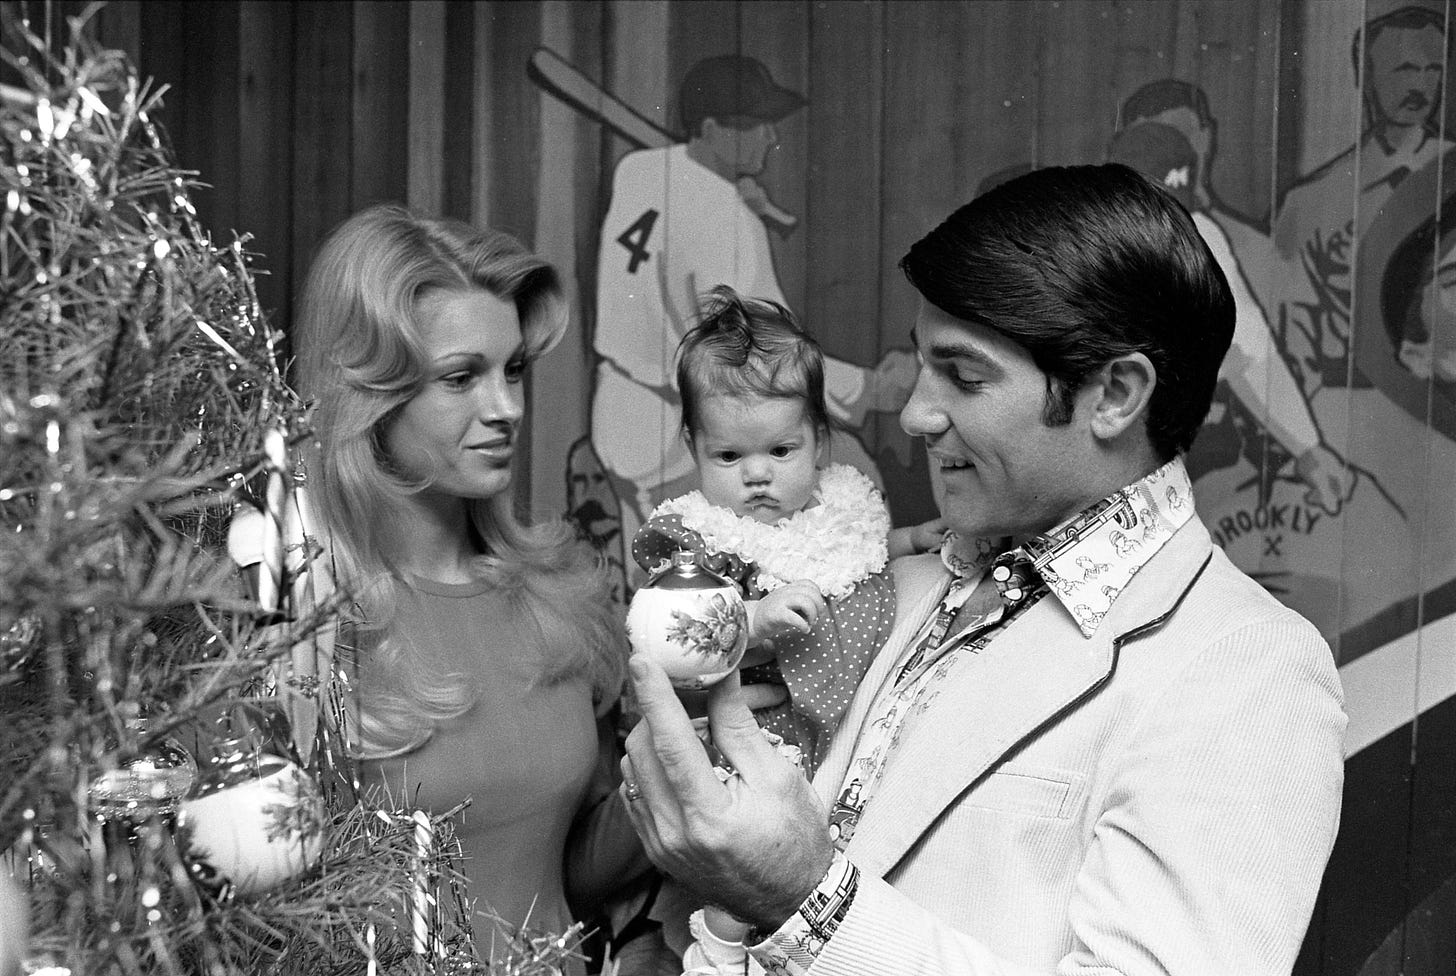 Steve Garvey with wife Cyndy, and baby daughter